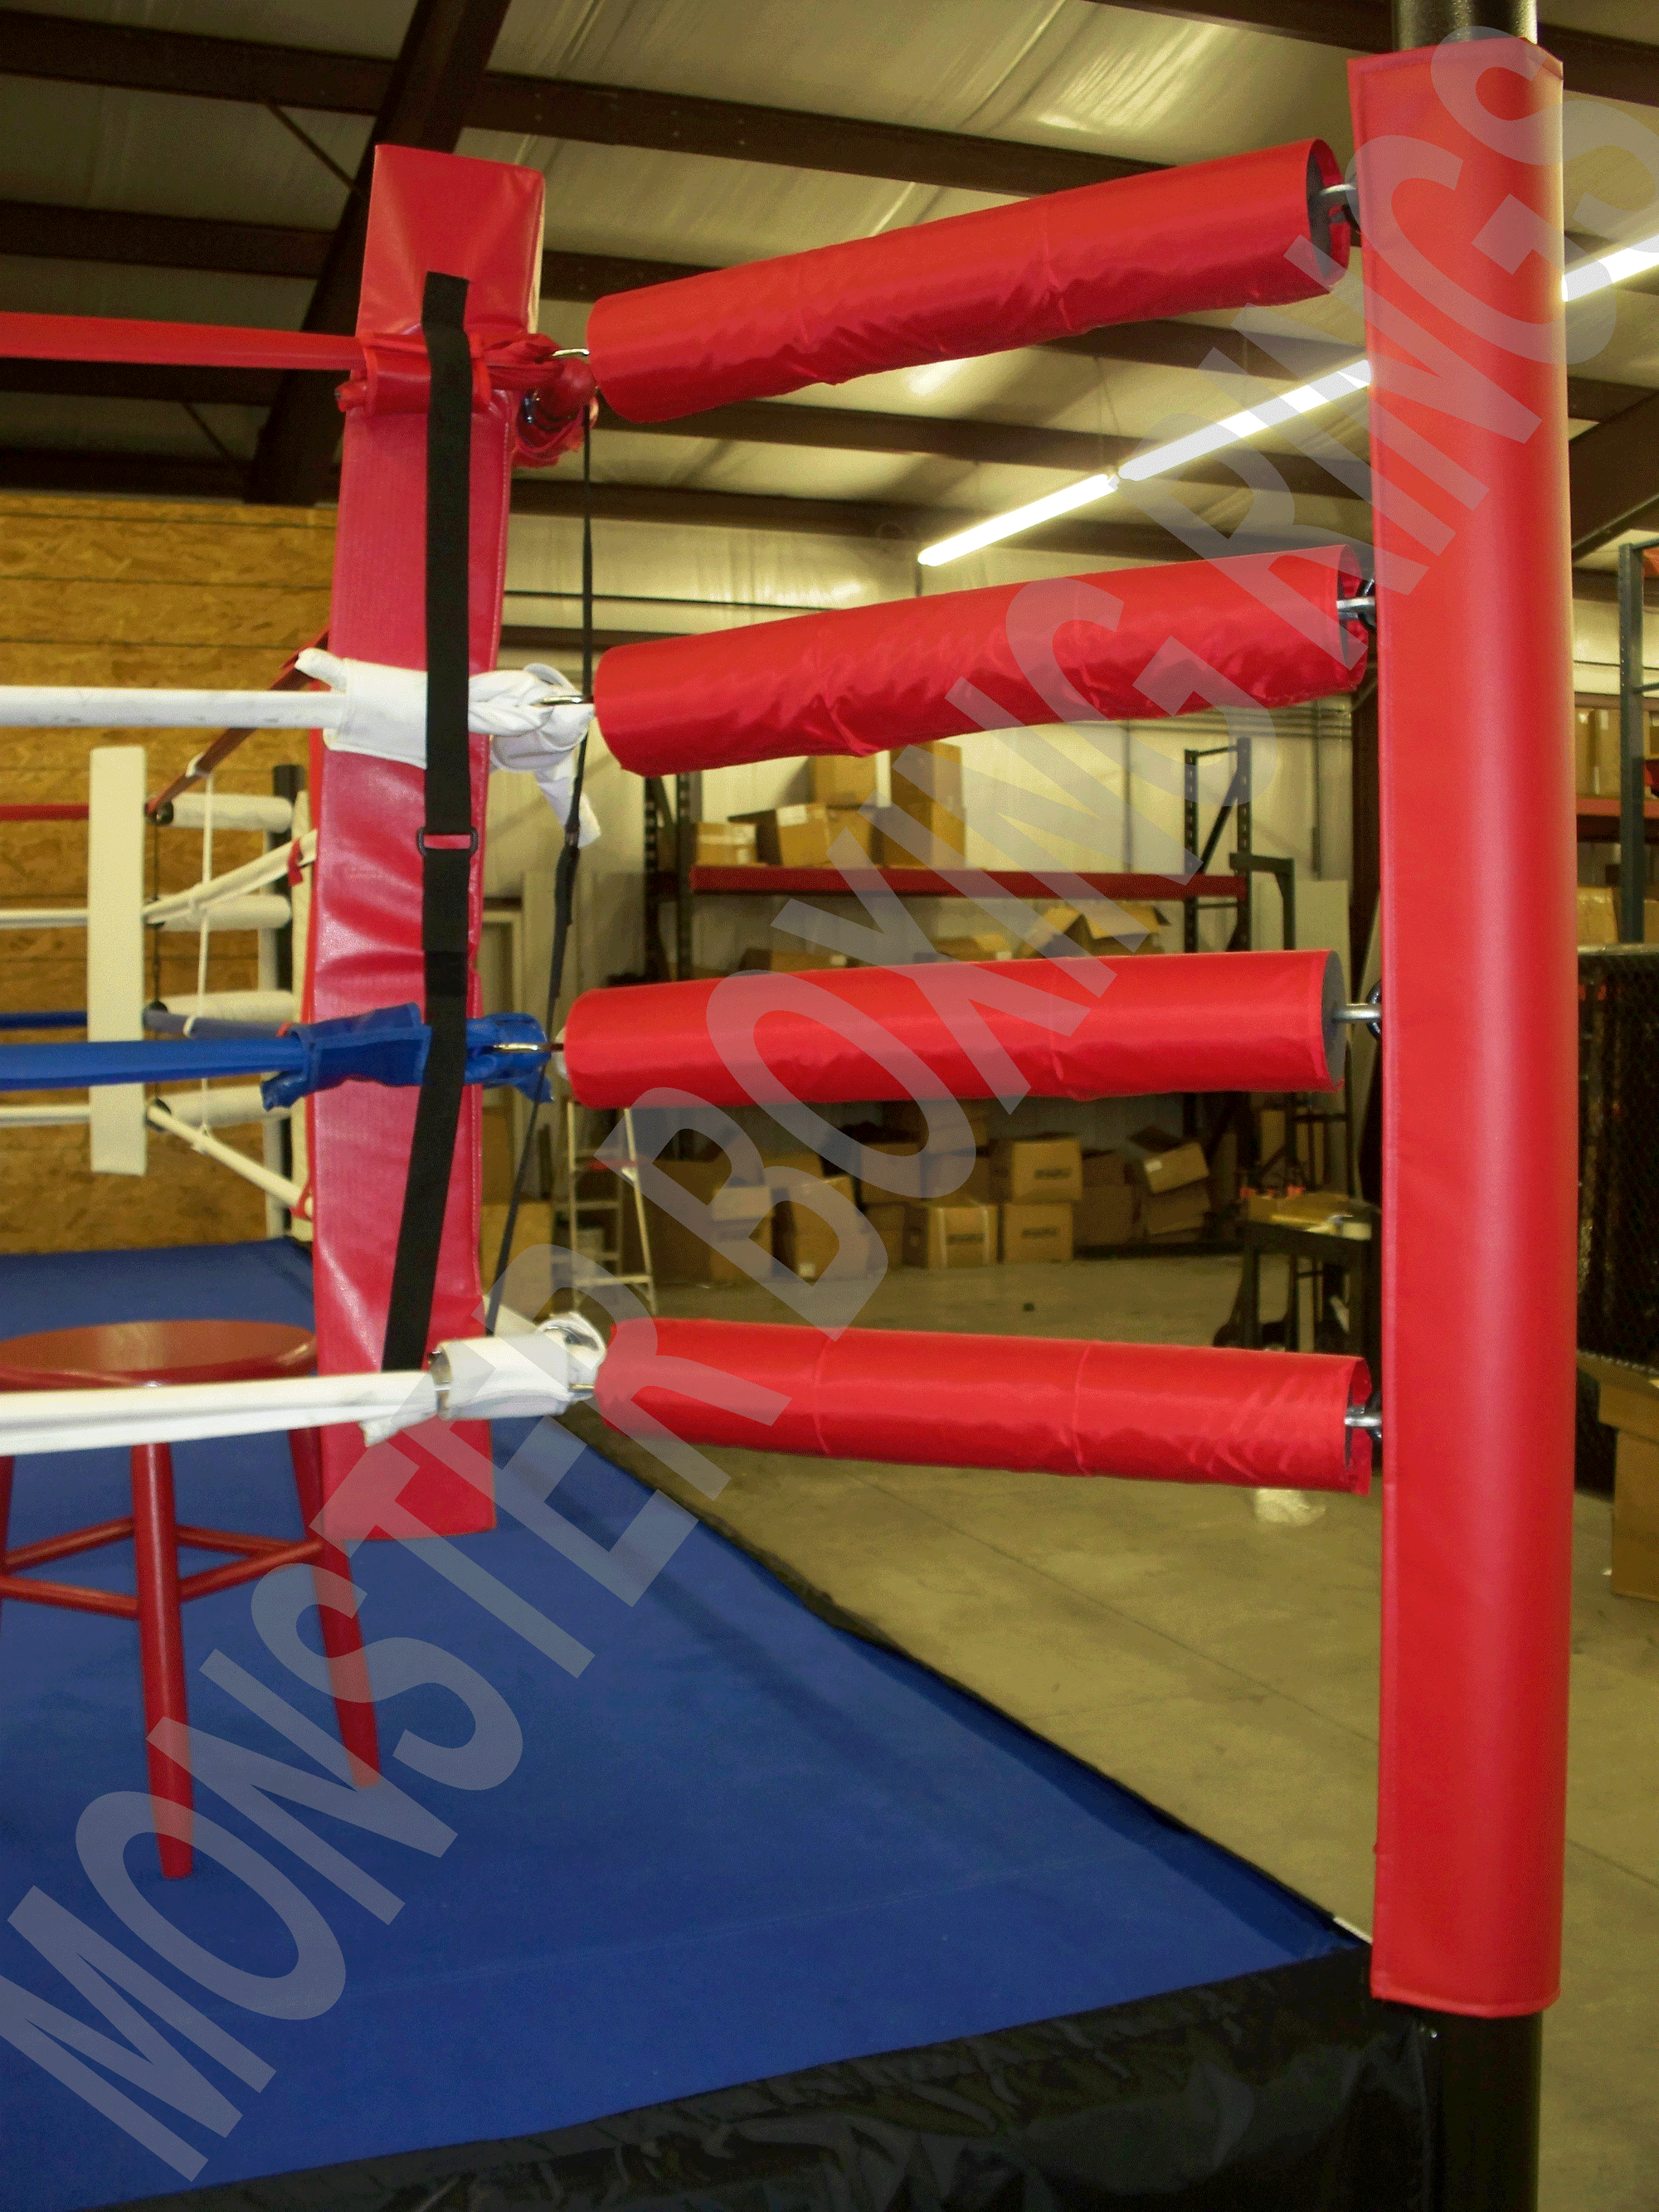 The very best boxing ring turnbuckle covers are available at Monster Rings and Cages